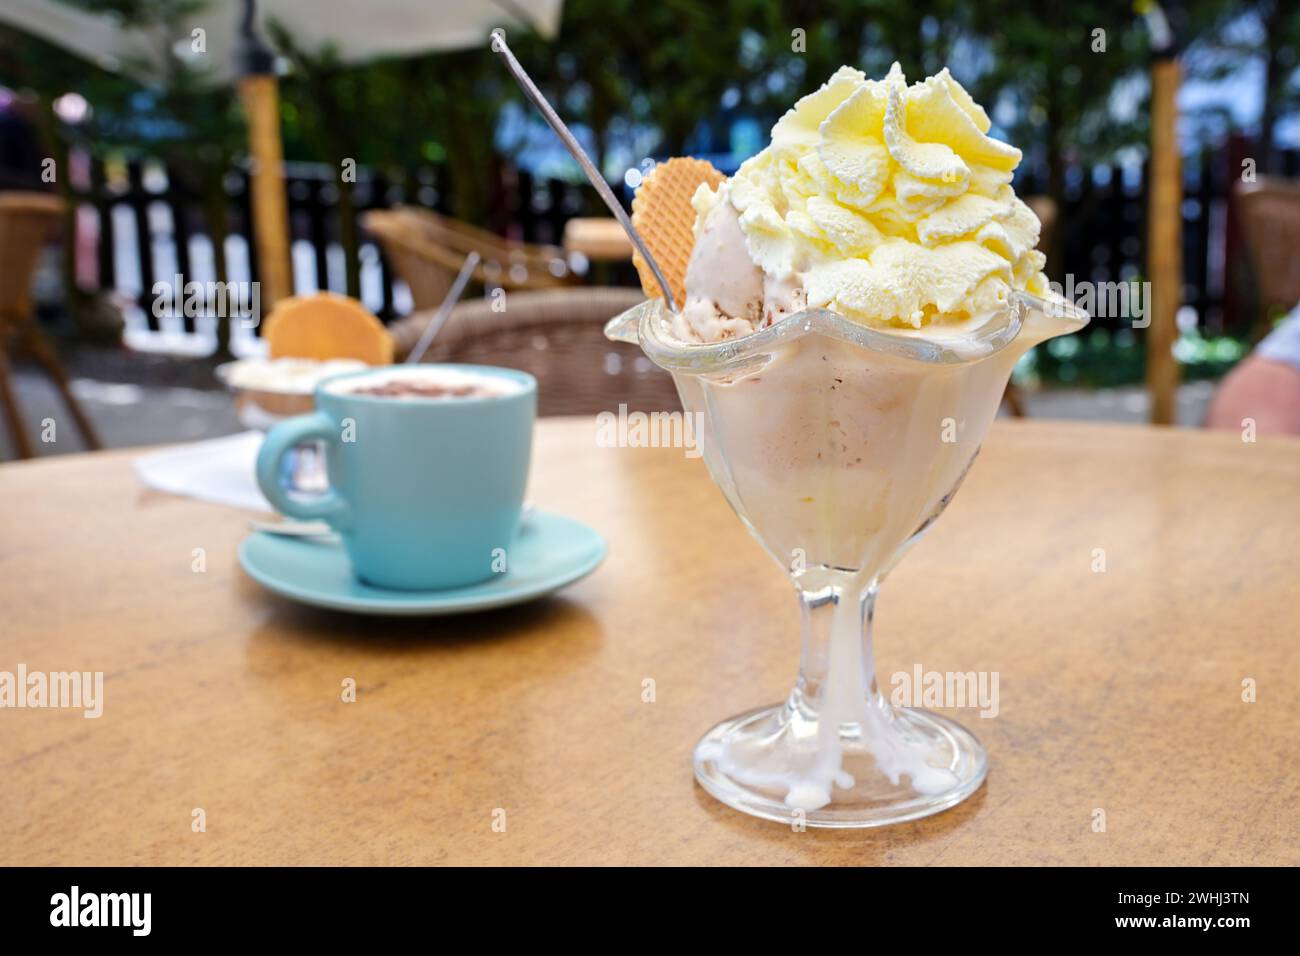 Ice cream sundae in a glass bowl and a coffee cup on the table in an outdoor cafe, delicious sweet dessert and refreshment in su Stock Photo